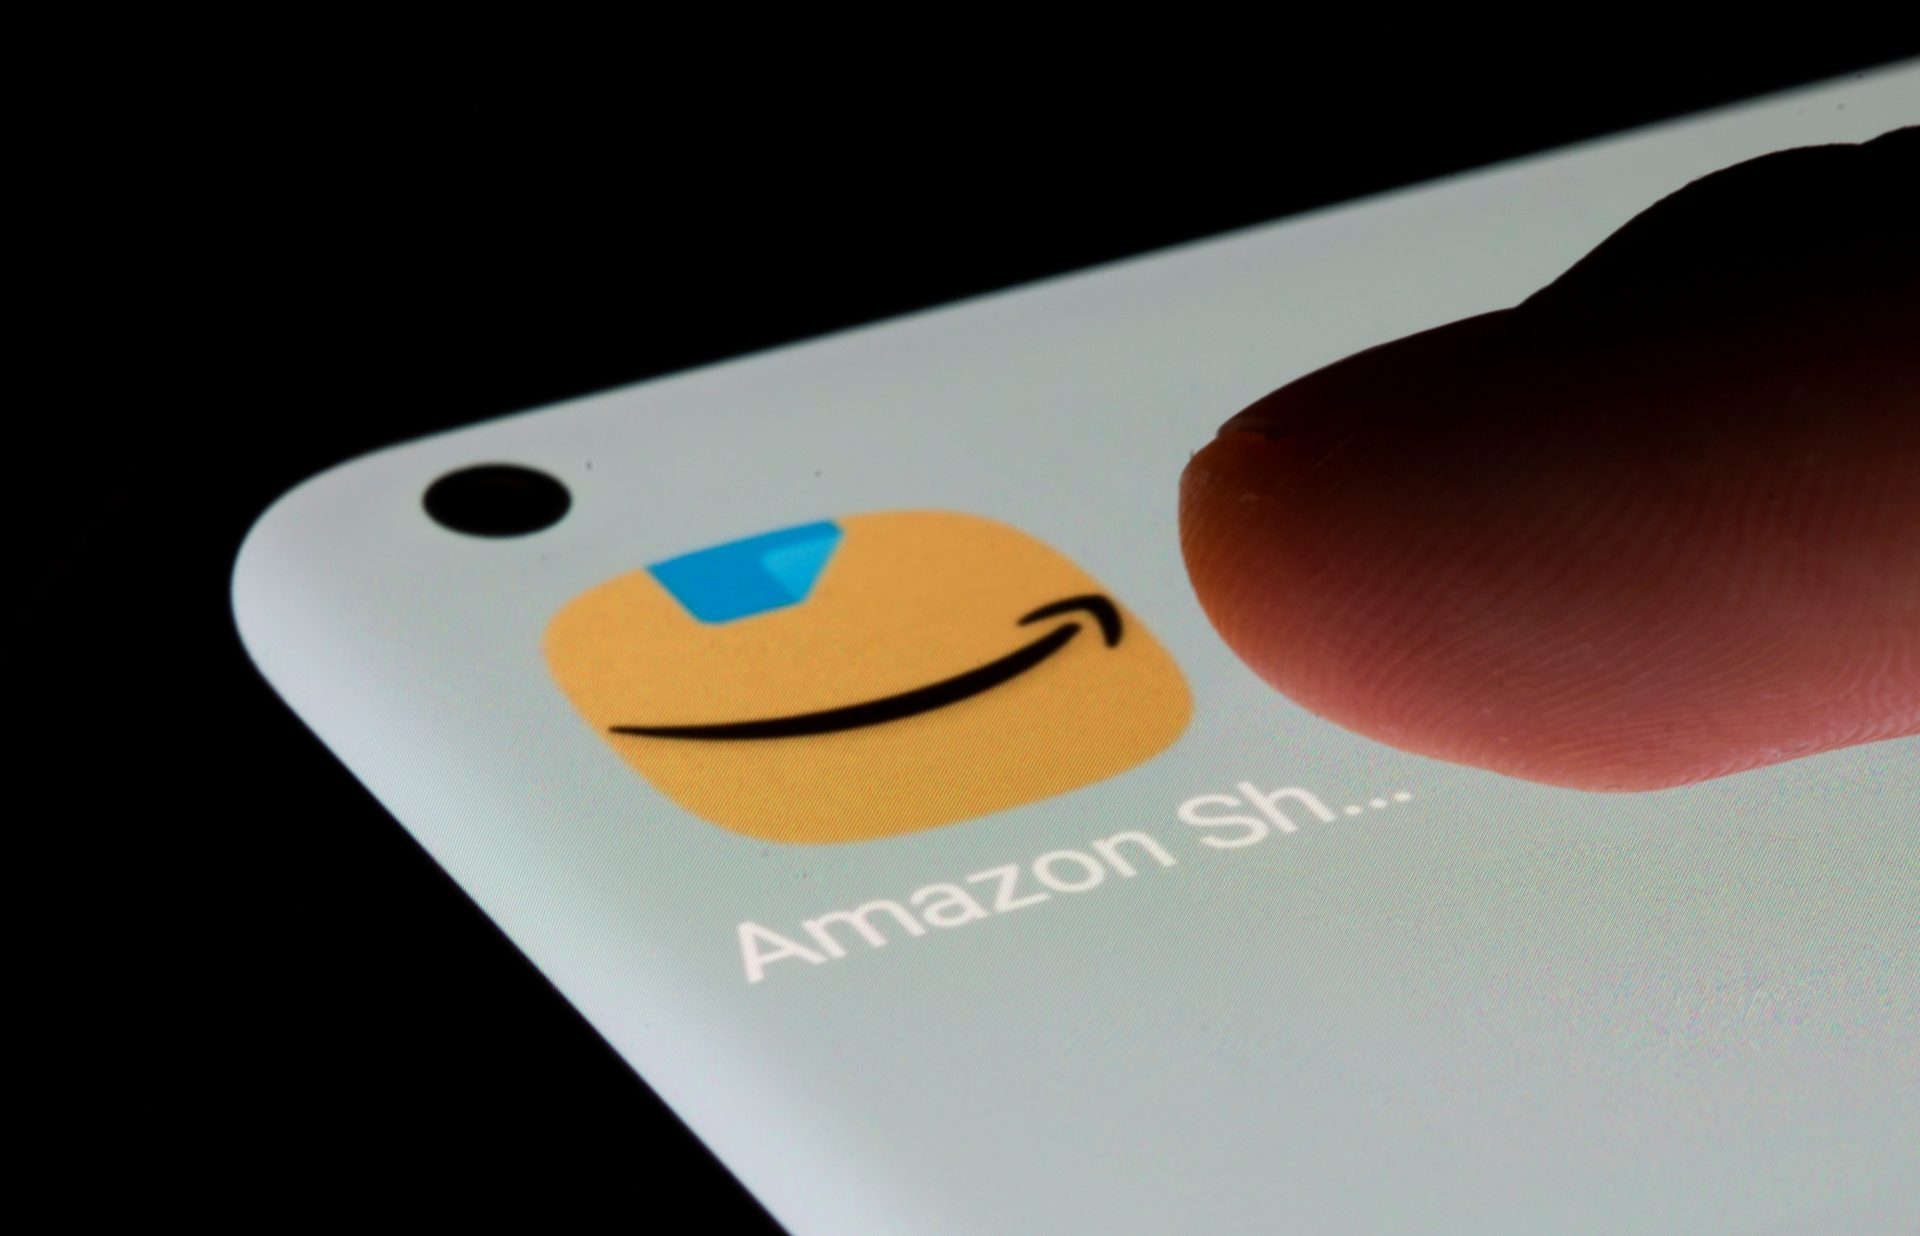 Amazon has banned over 600 Chinese brands as section of review fraud crackdown